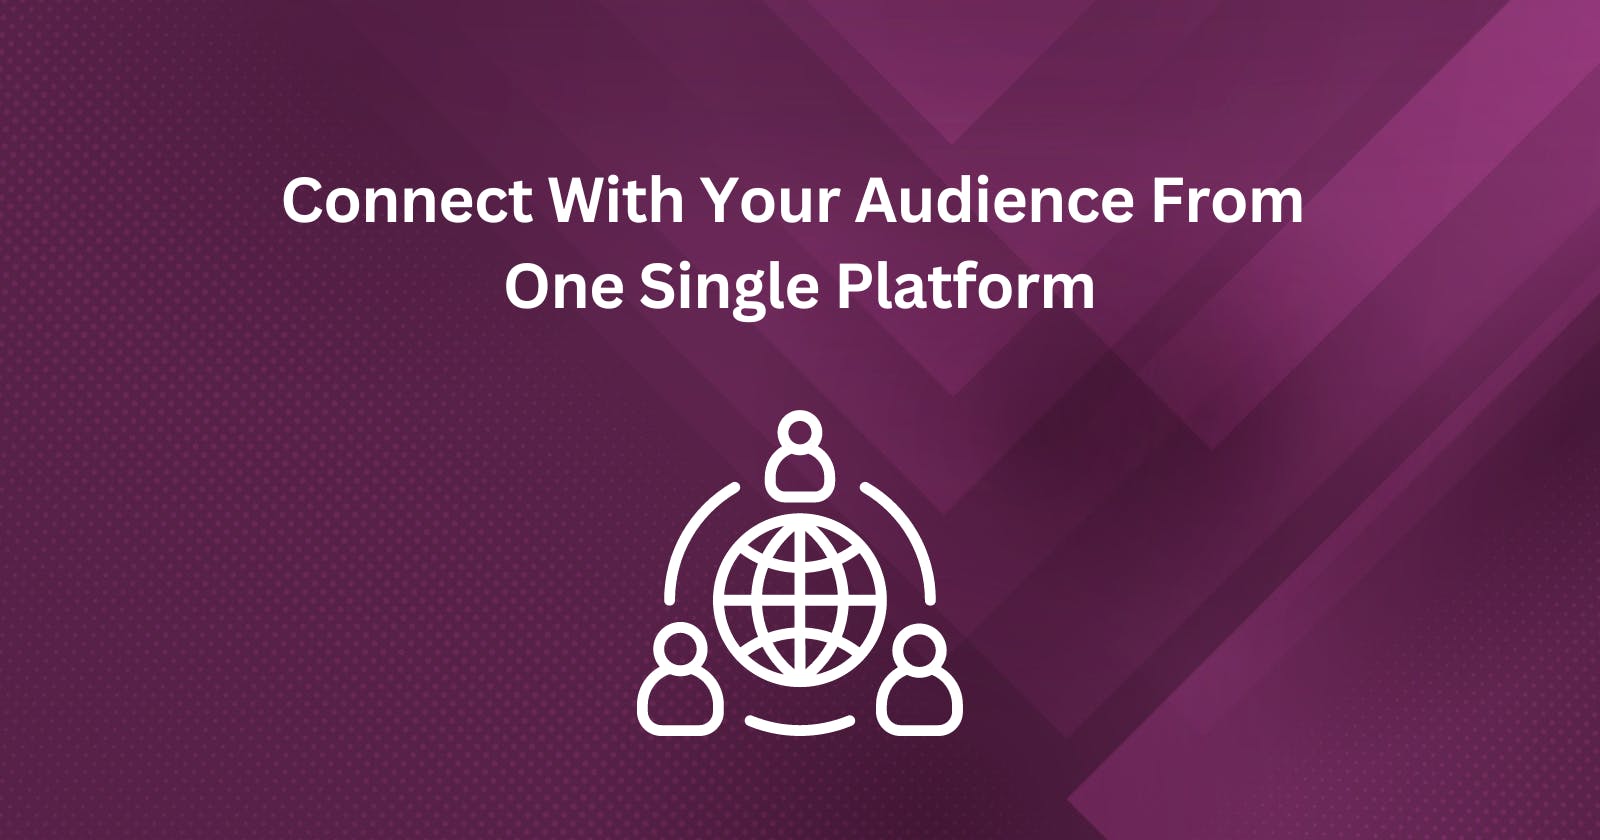 Connect With Your Audience From 
One Single Platform